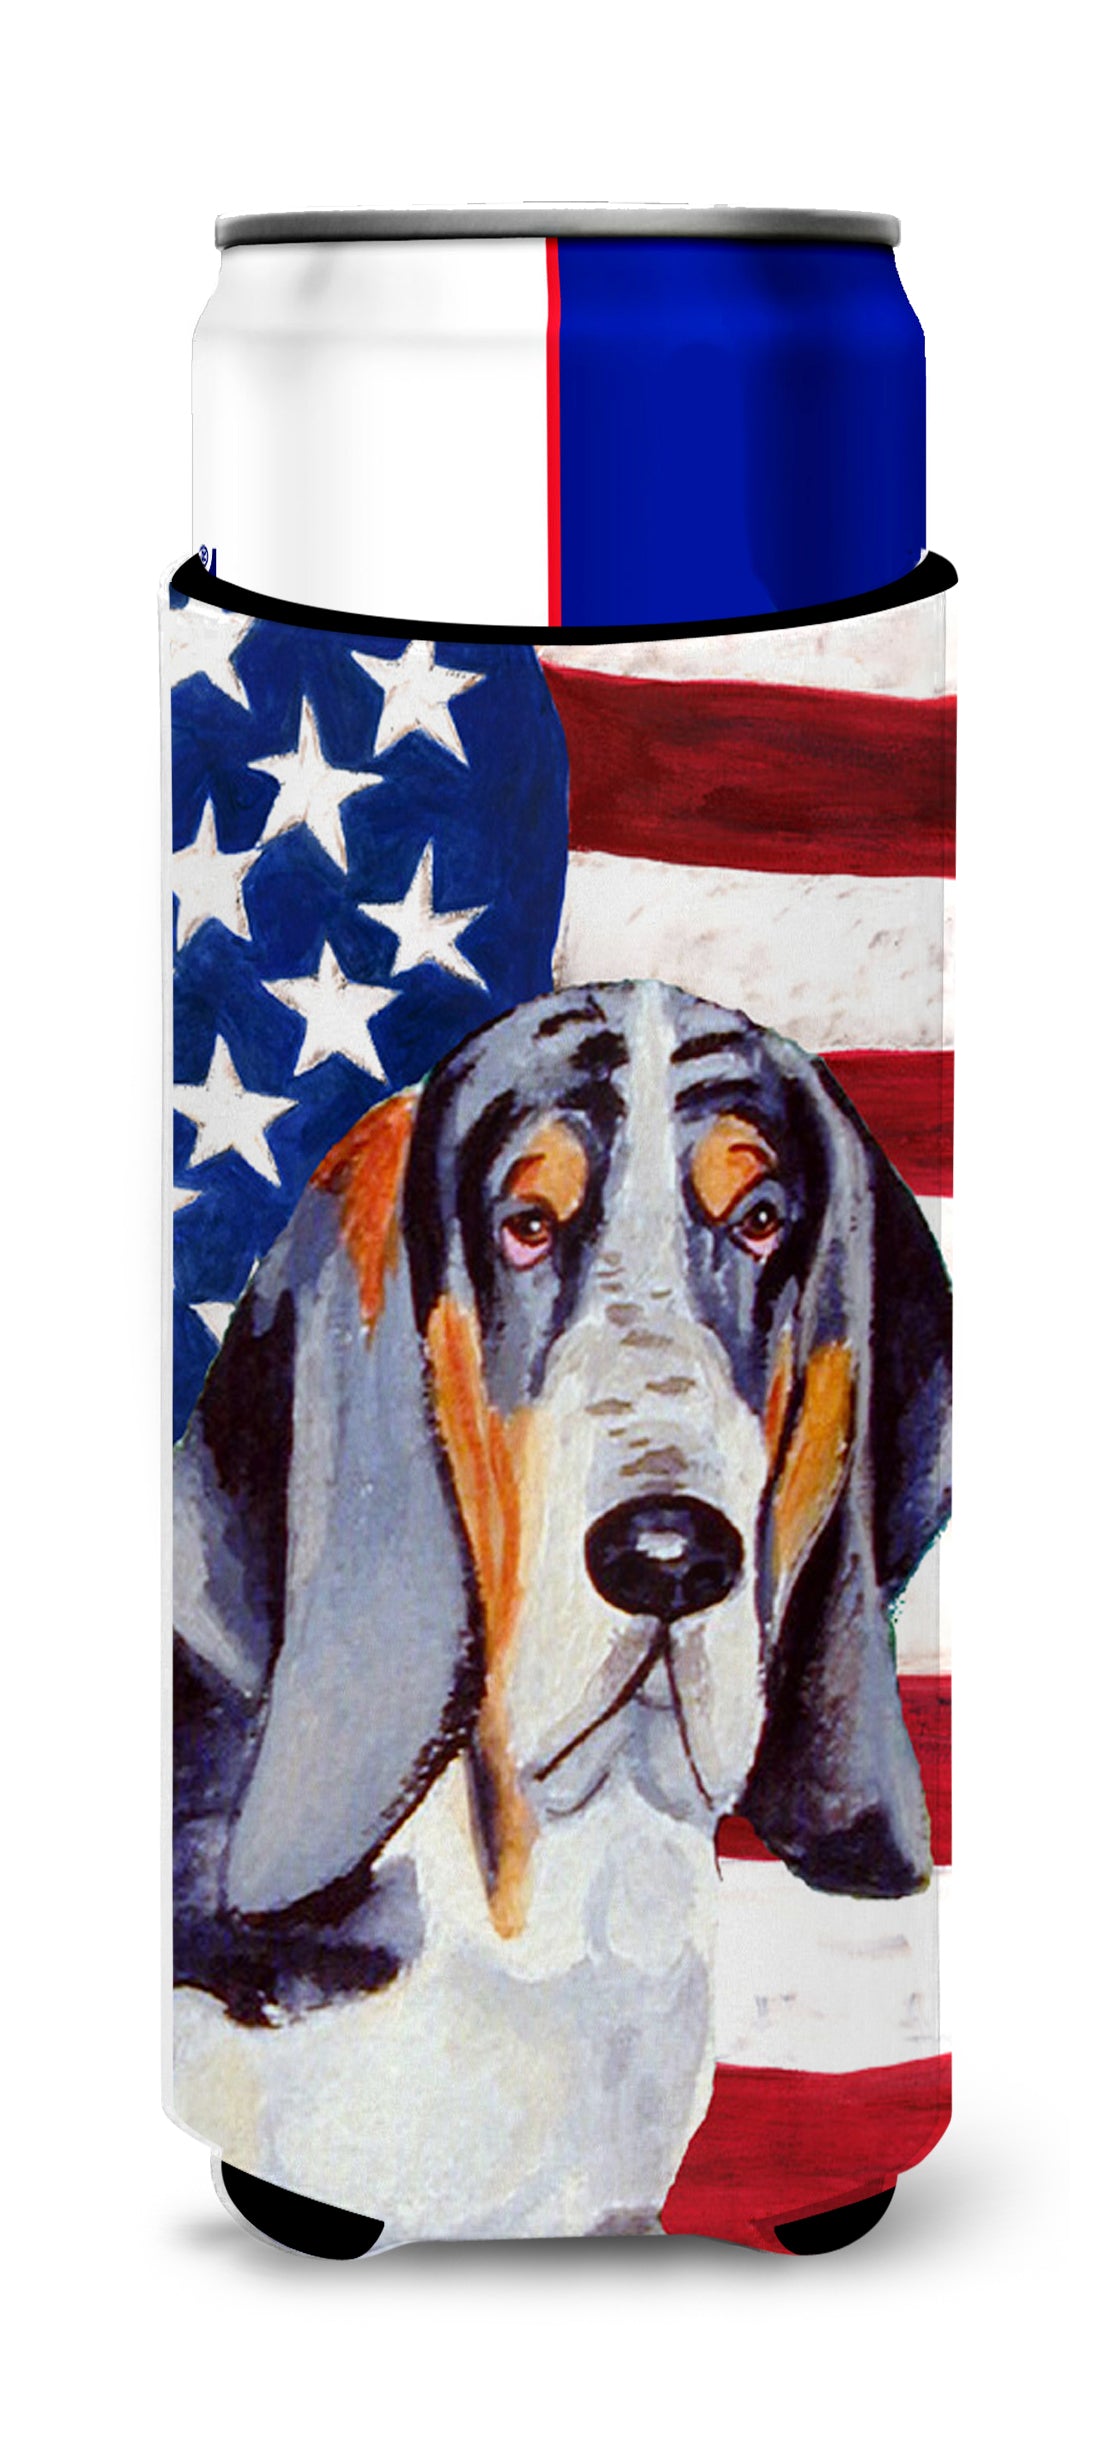 USA American Flag with Basset Hound Ultra Beverage Insulators for slim cans LH9014MUK.